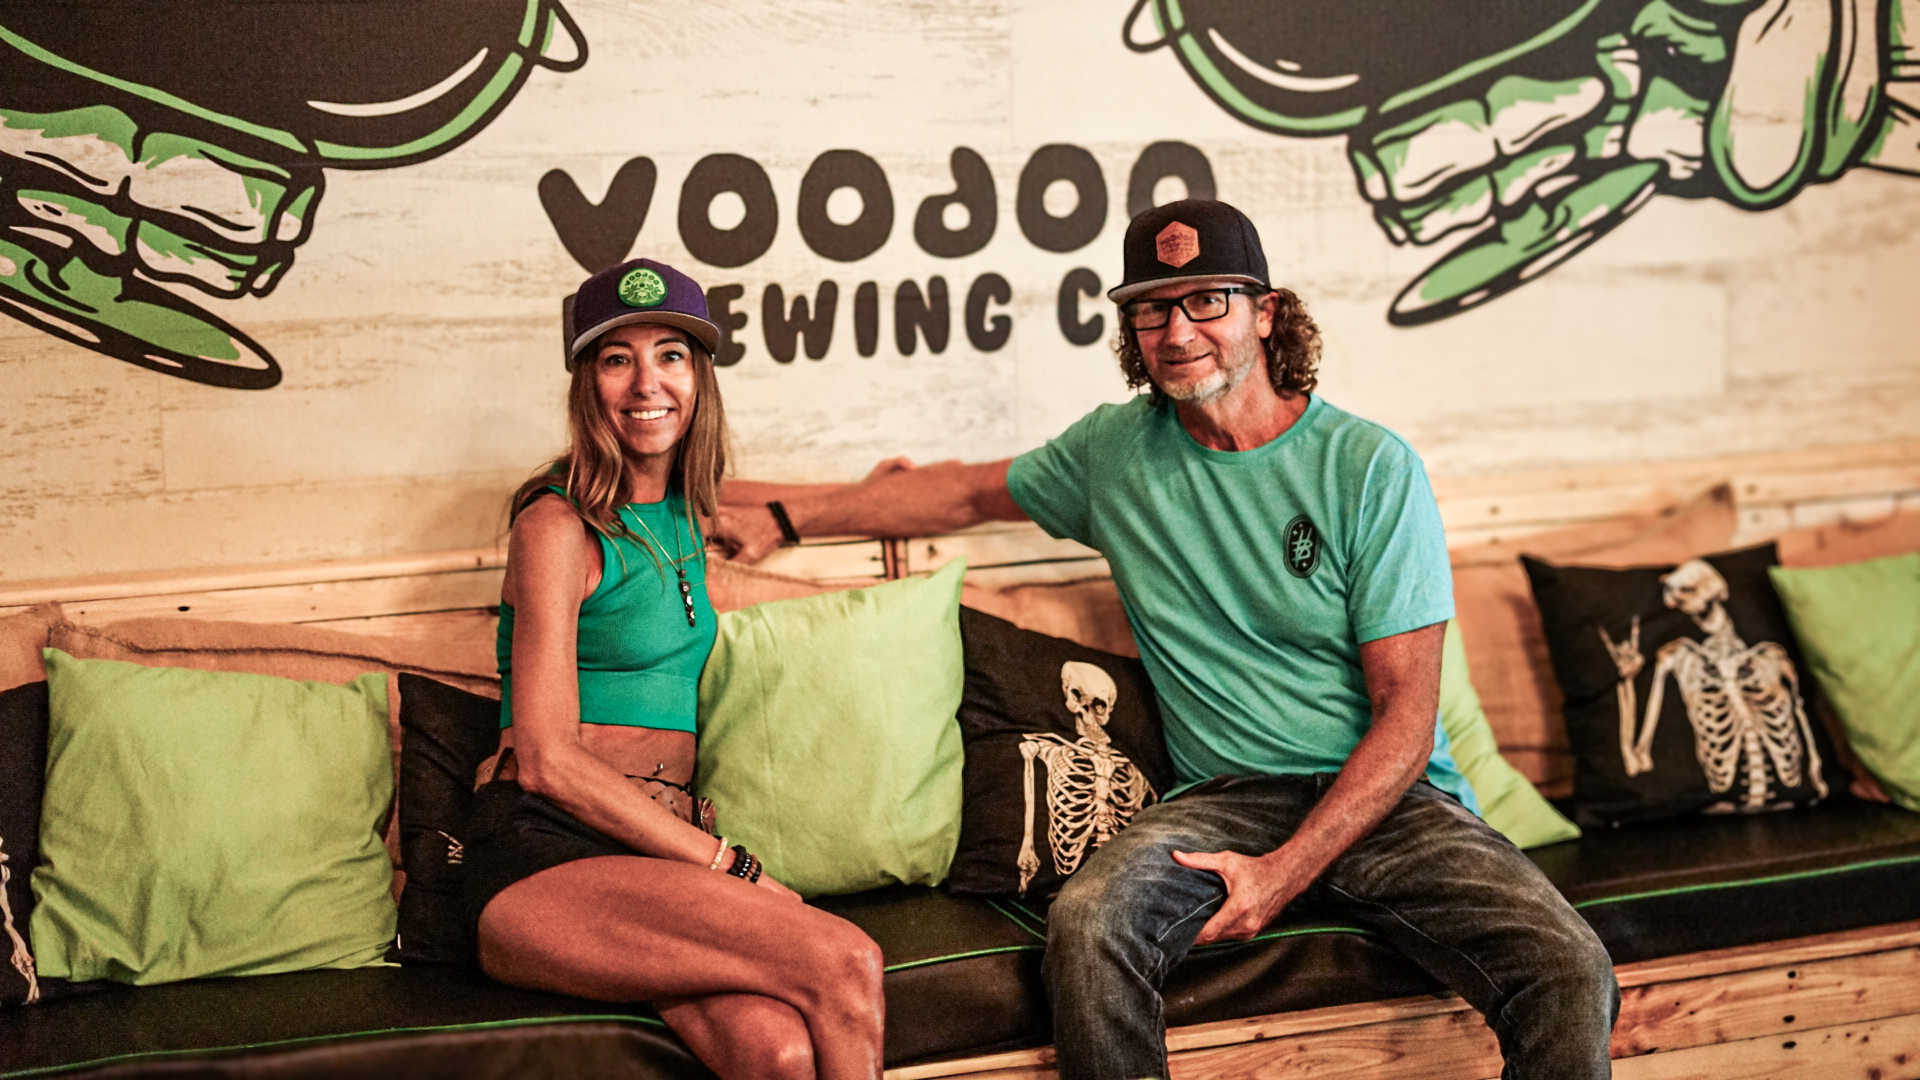 Voodoo Brewing Co. revolutionizes brewery industry with innovative business model